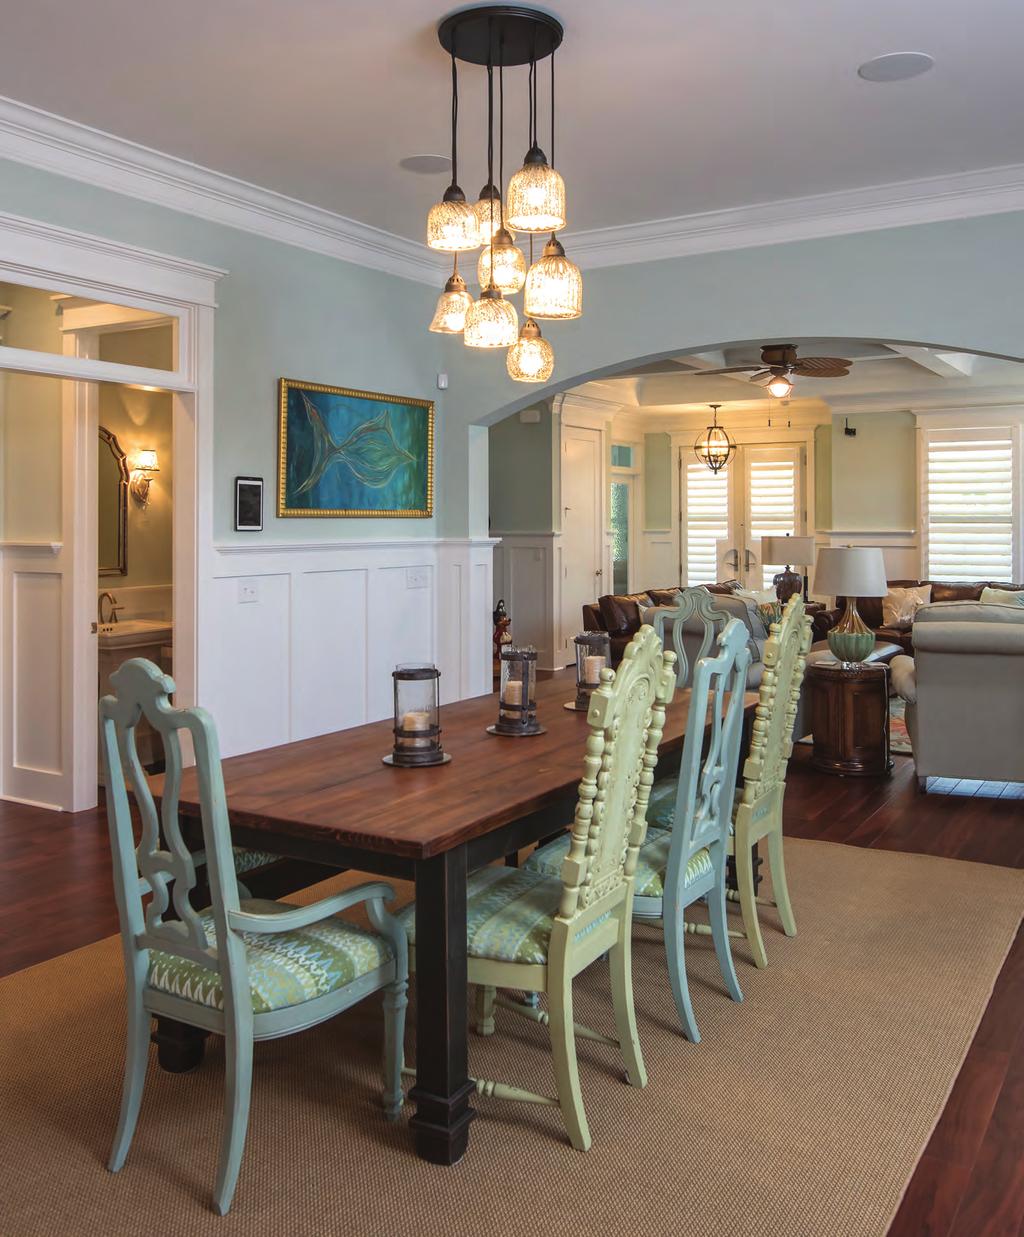 A large dining room table is perfect for entertaining guests, and is open